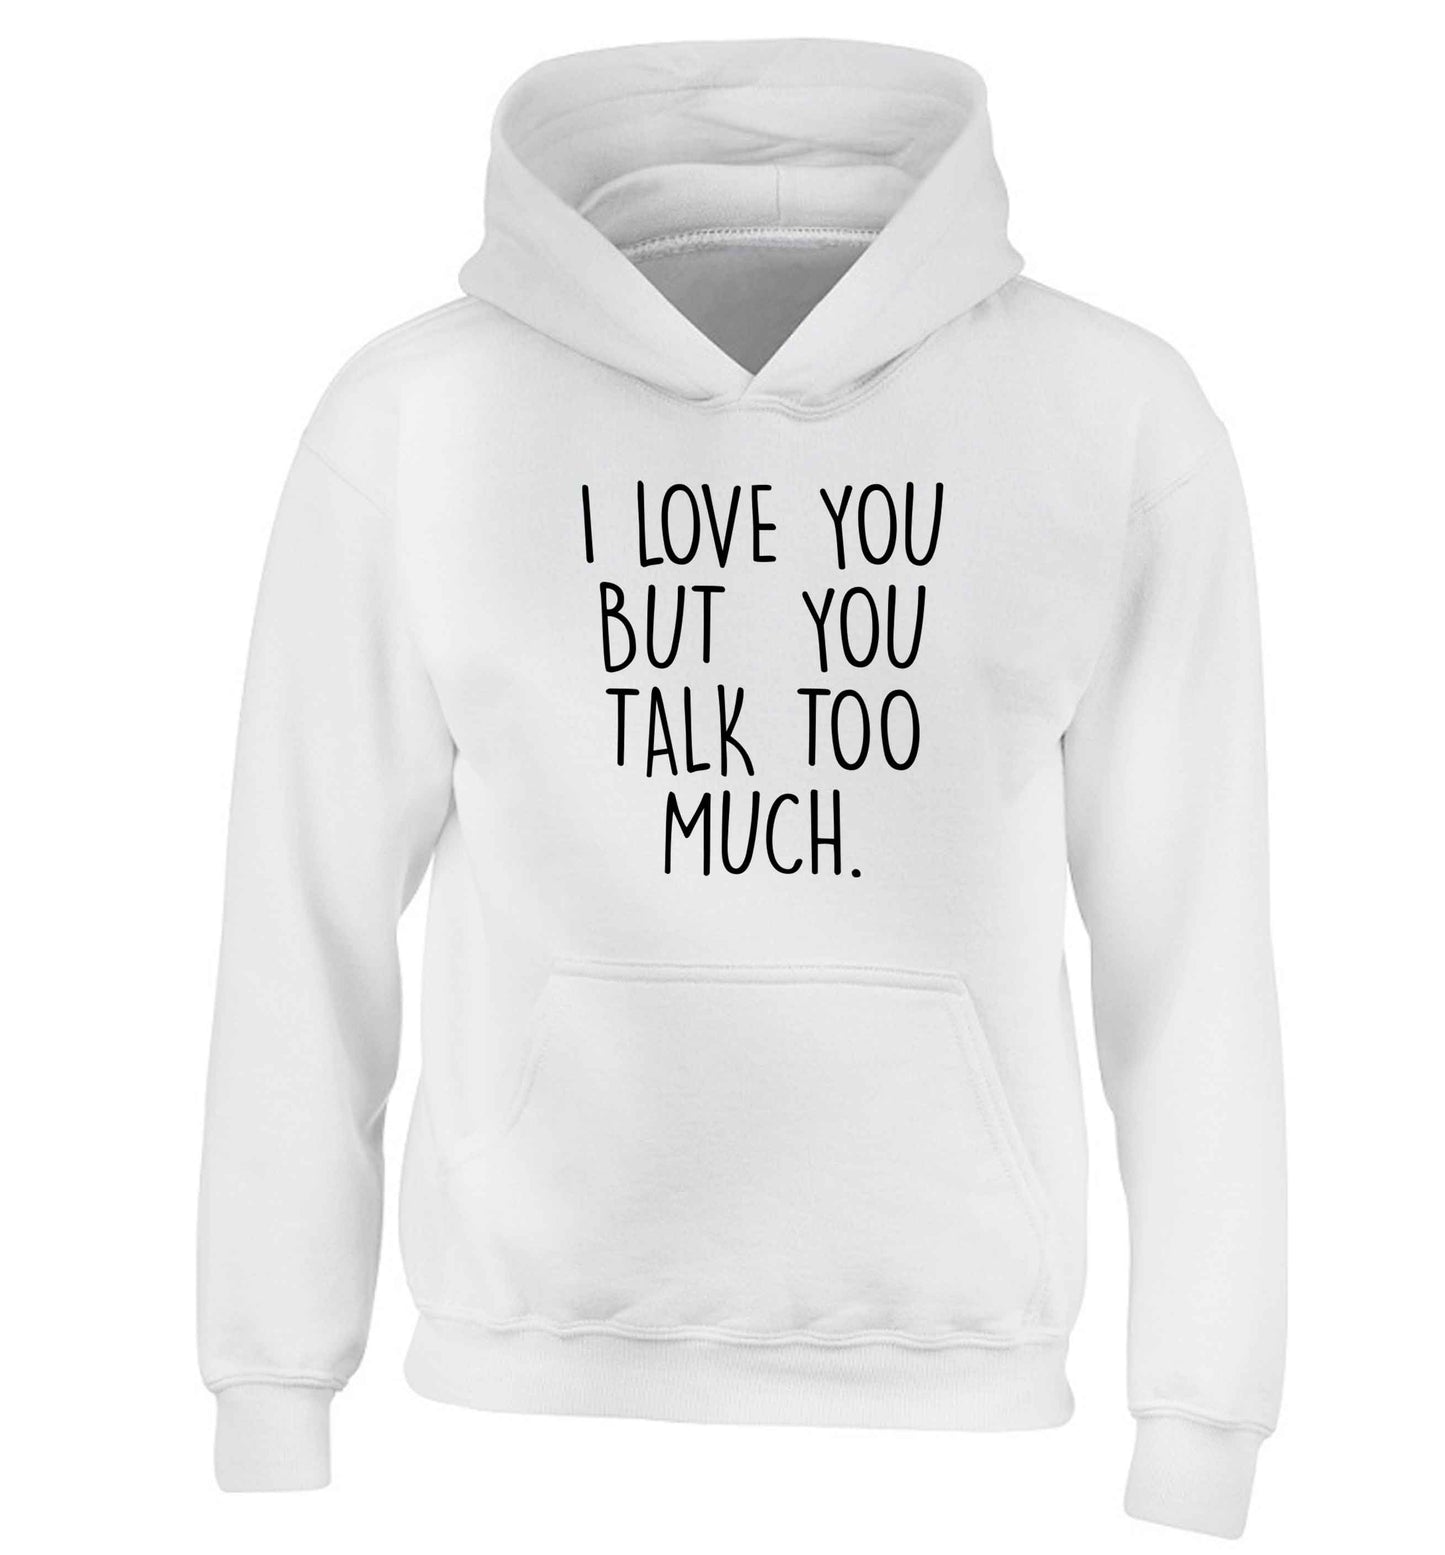 I love you but you talk too much children's white hoodie 12-13 Years